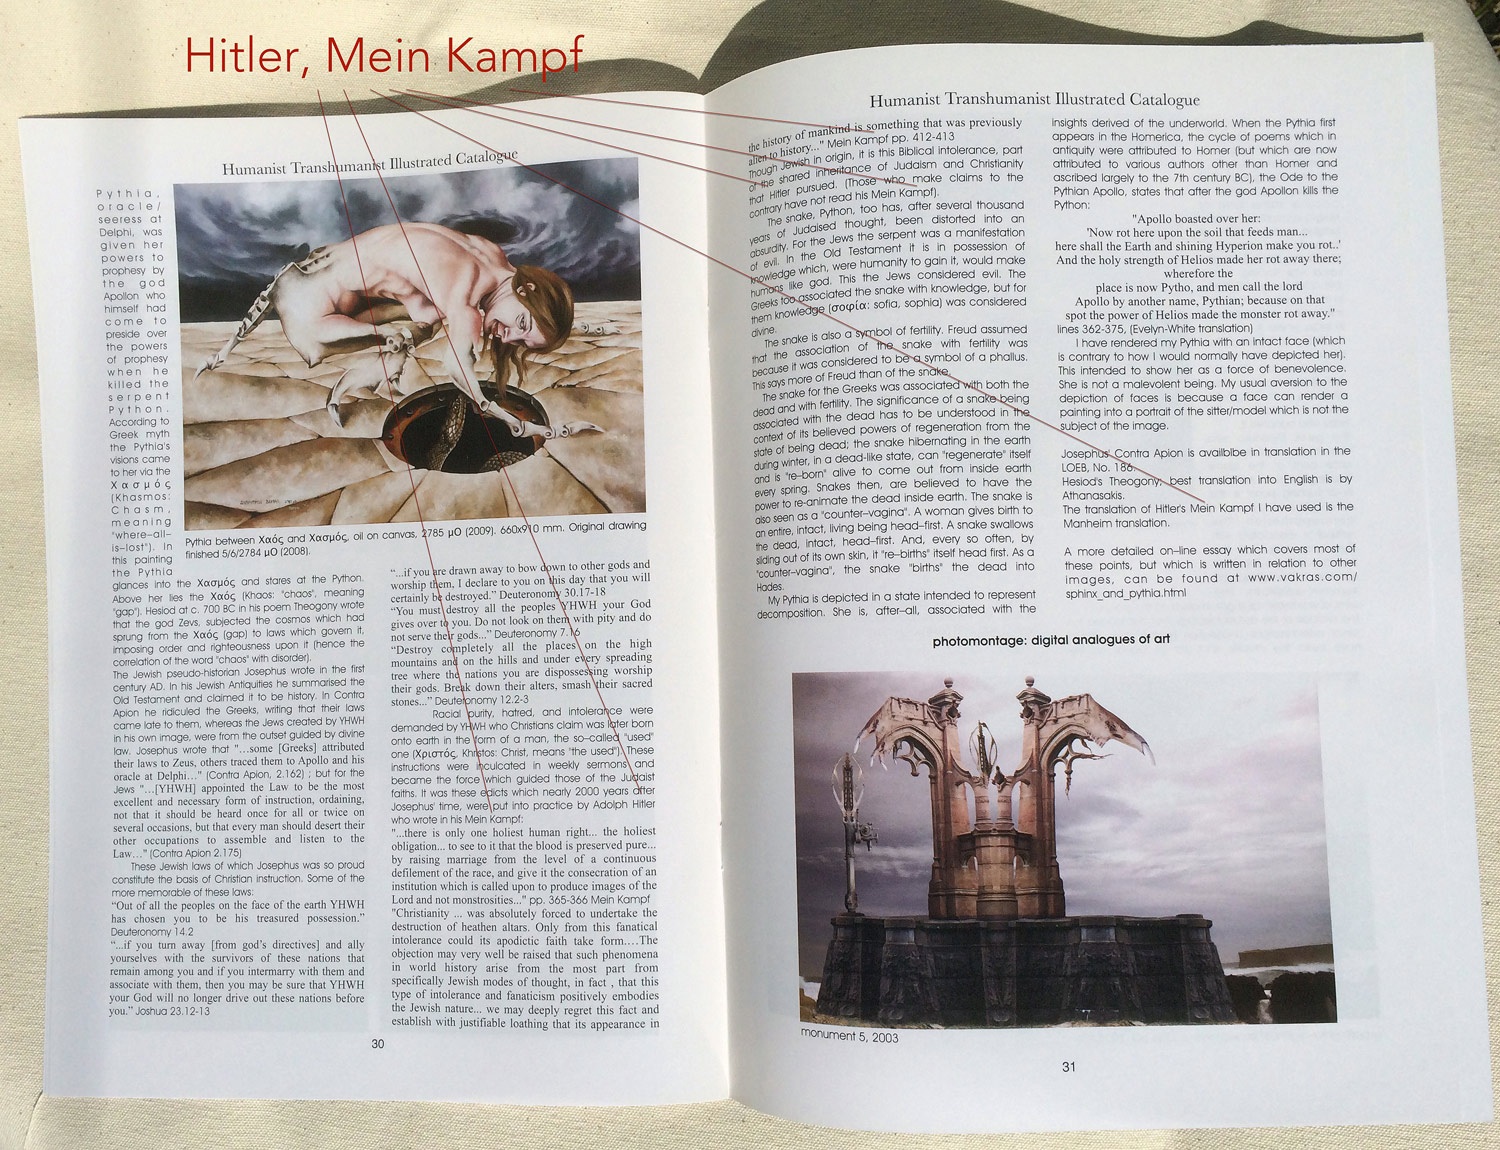 Humanist Transhumanist Hitler based his genocide on the Bible